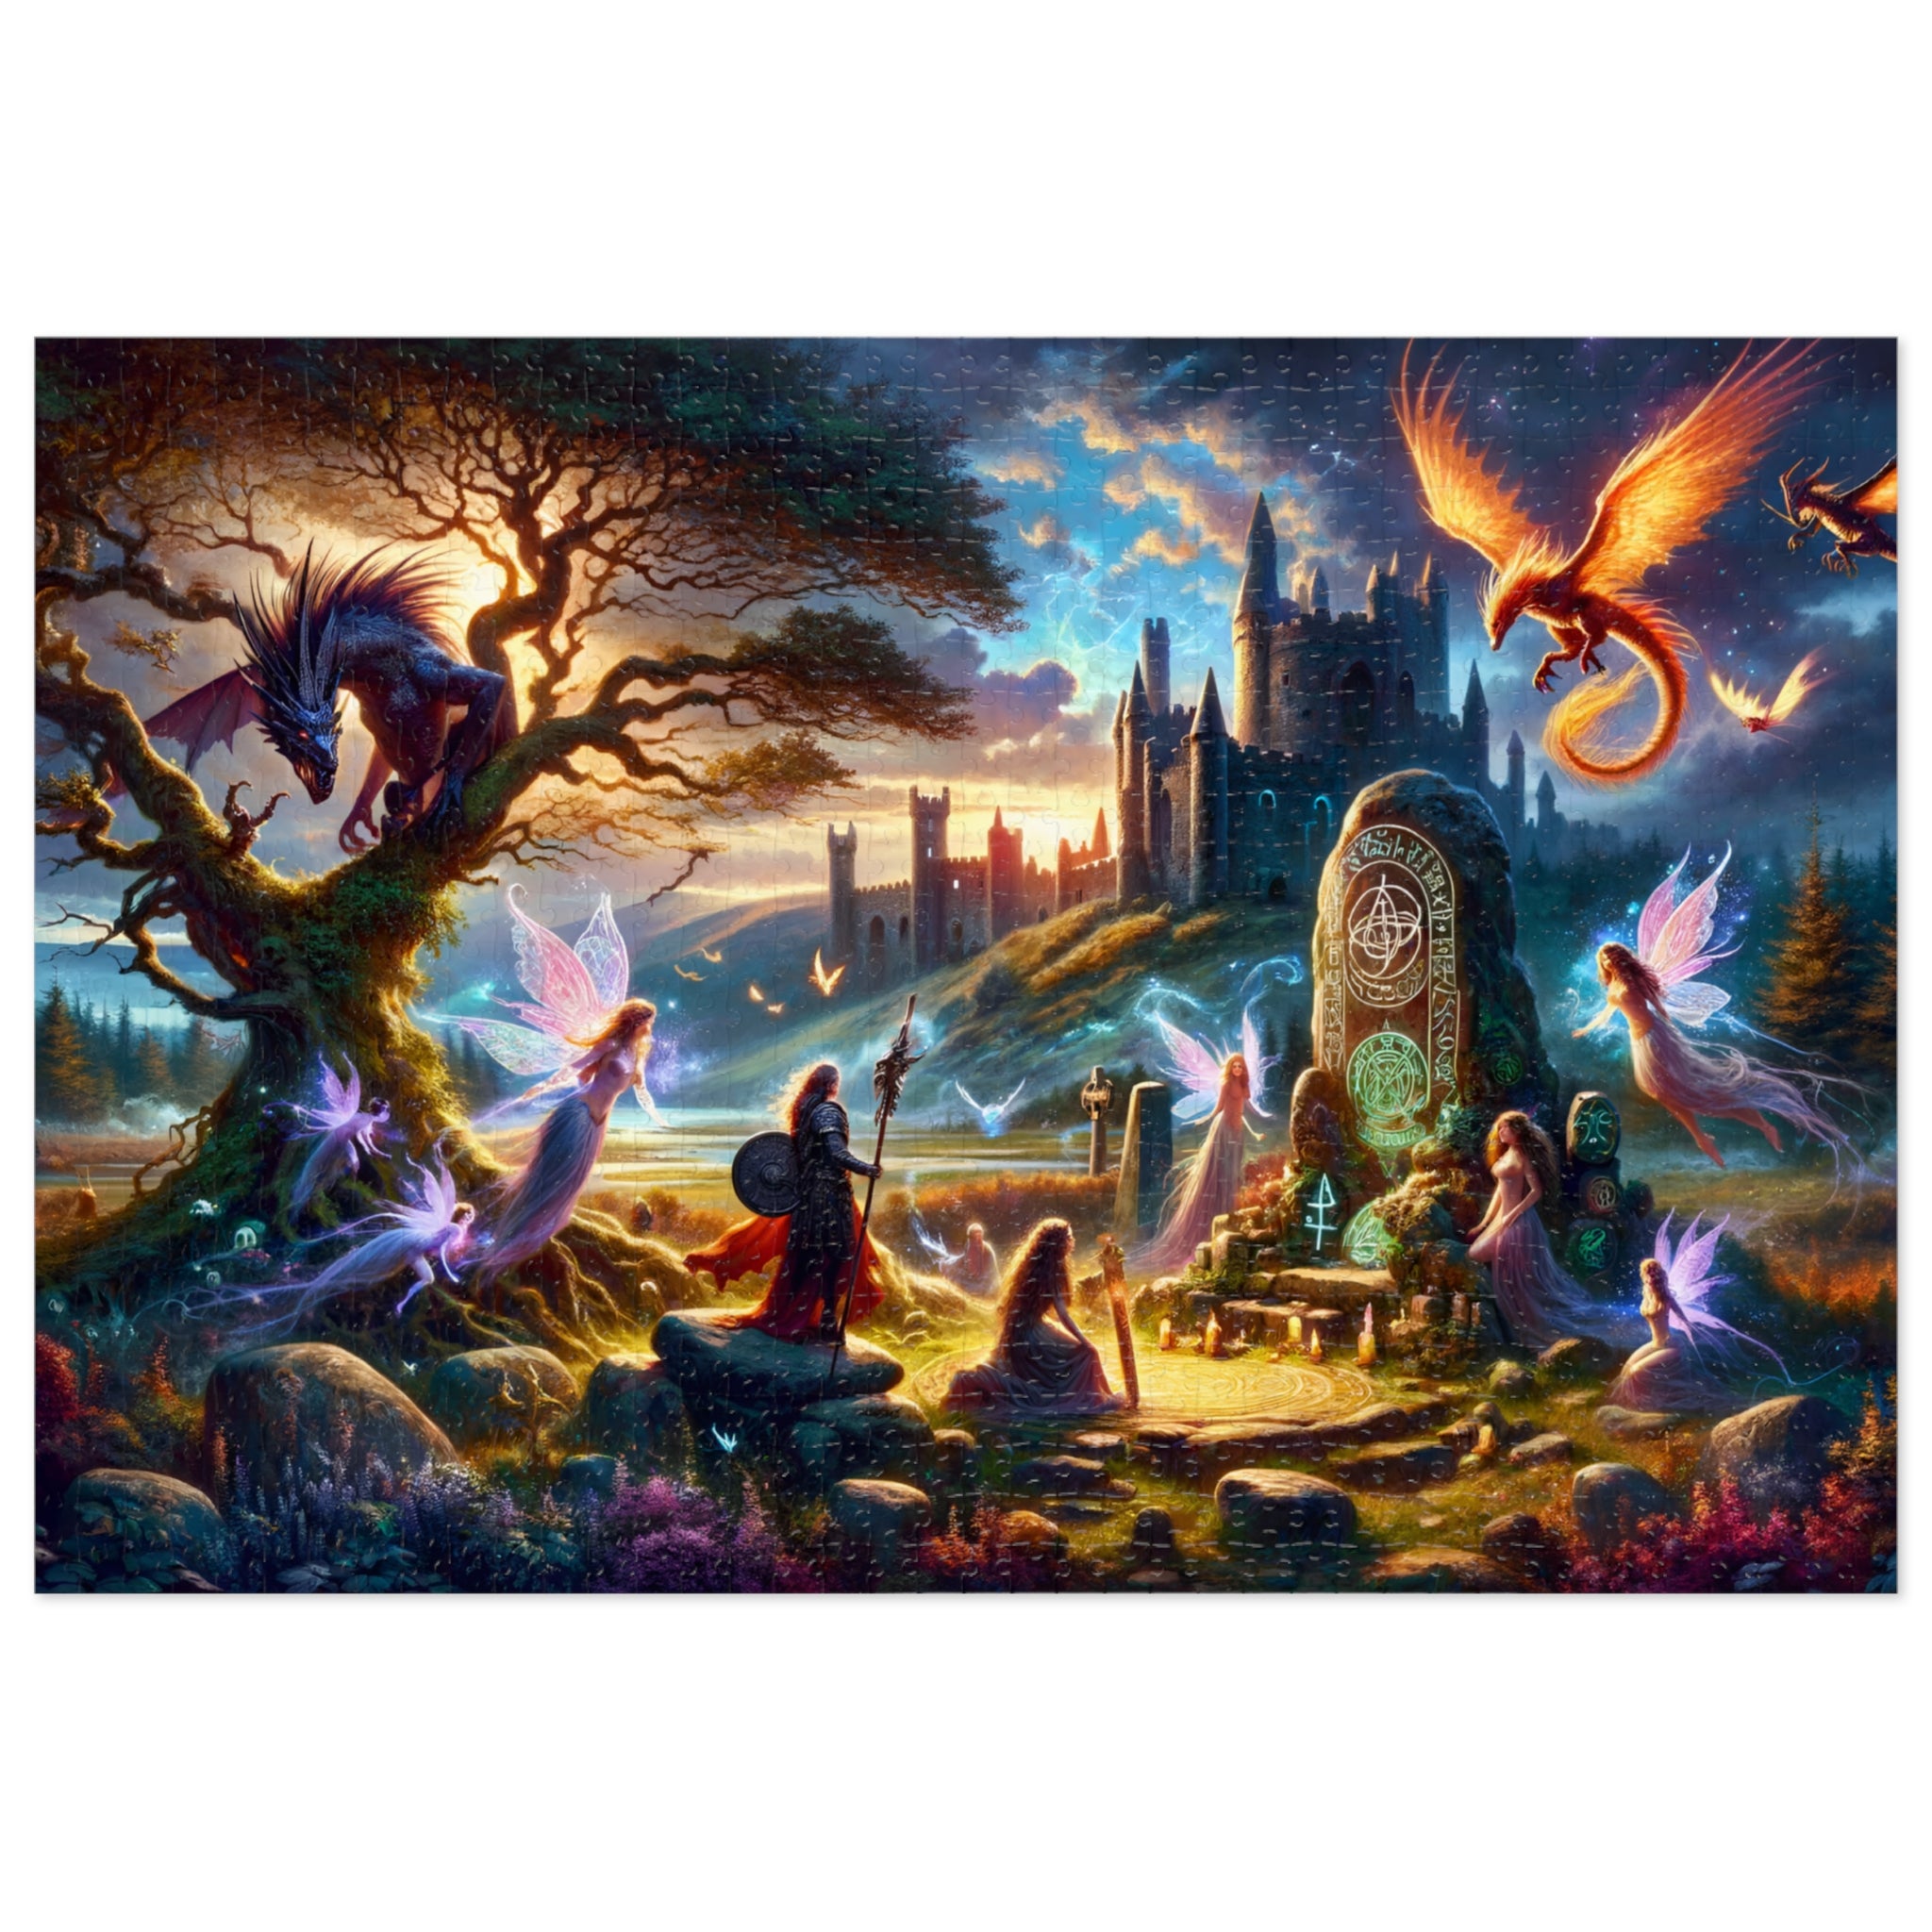 Mystical Ireland: Legends and Lore - 1000-Piece Jigsaw Puzzle